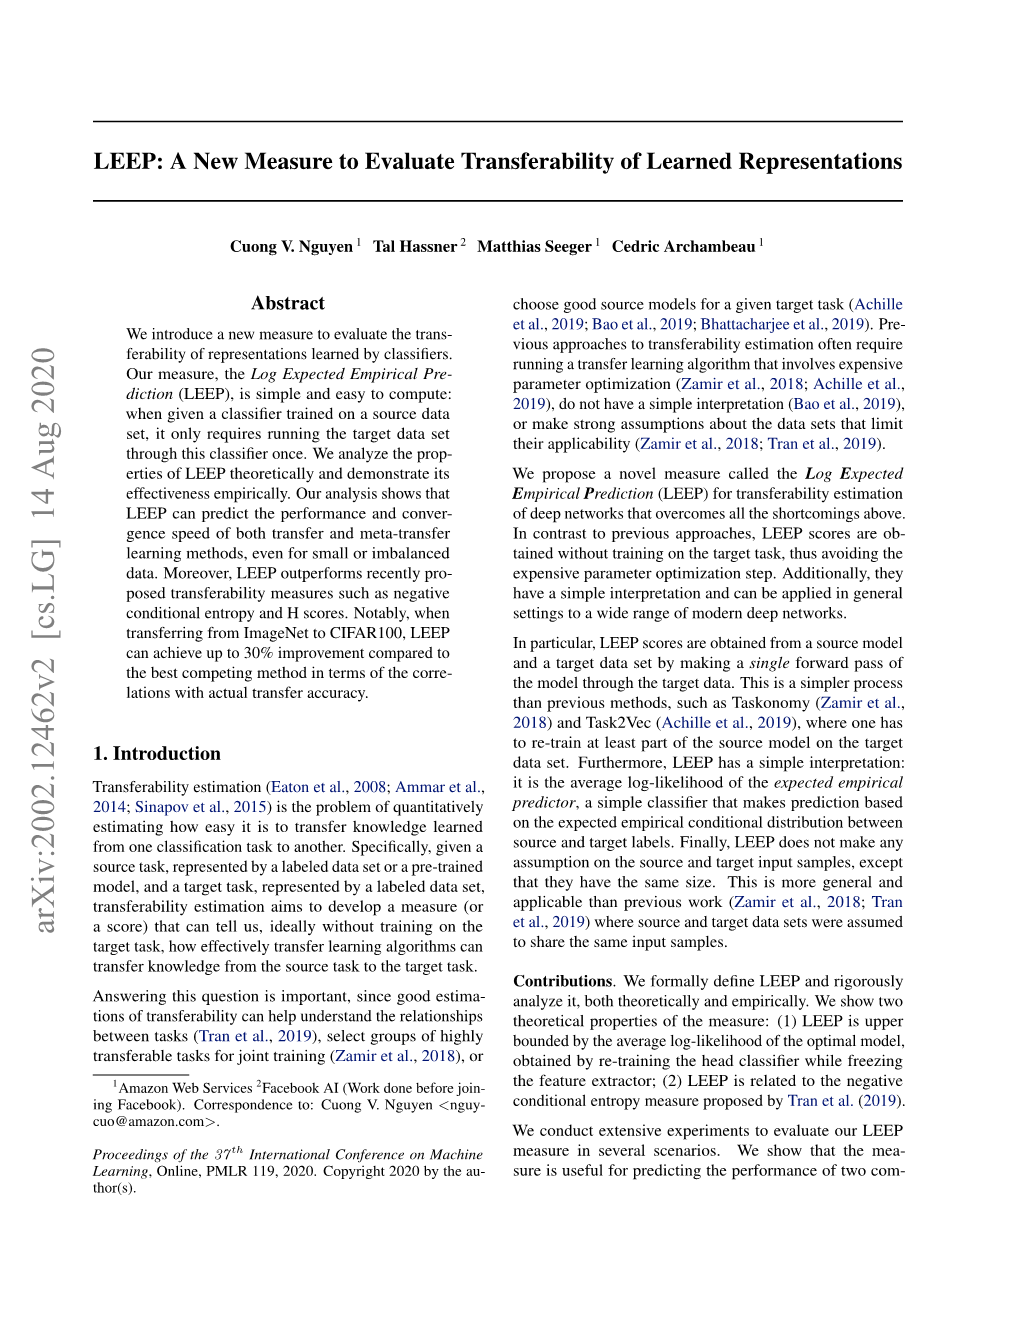 LEEP: a New Measure to Evaluate Transferability of Learned Representations